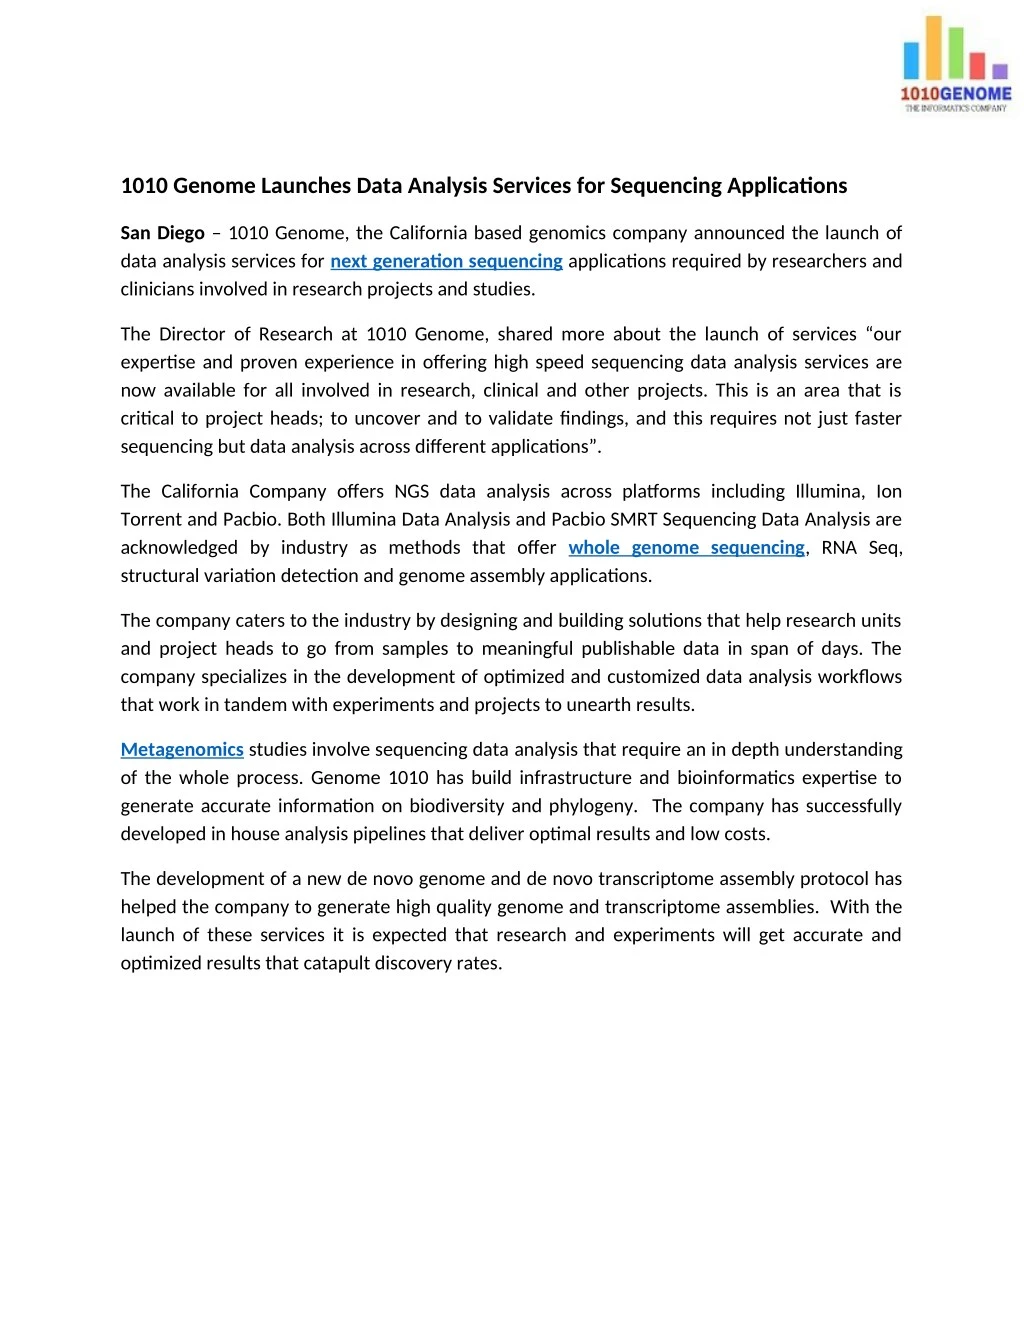 1010 genome launches data analysis services